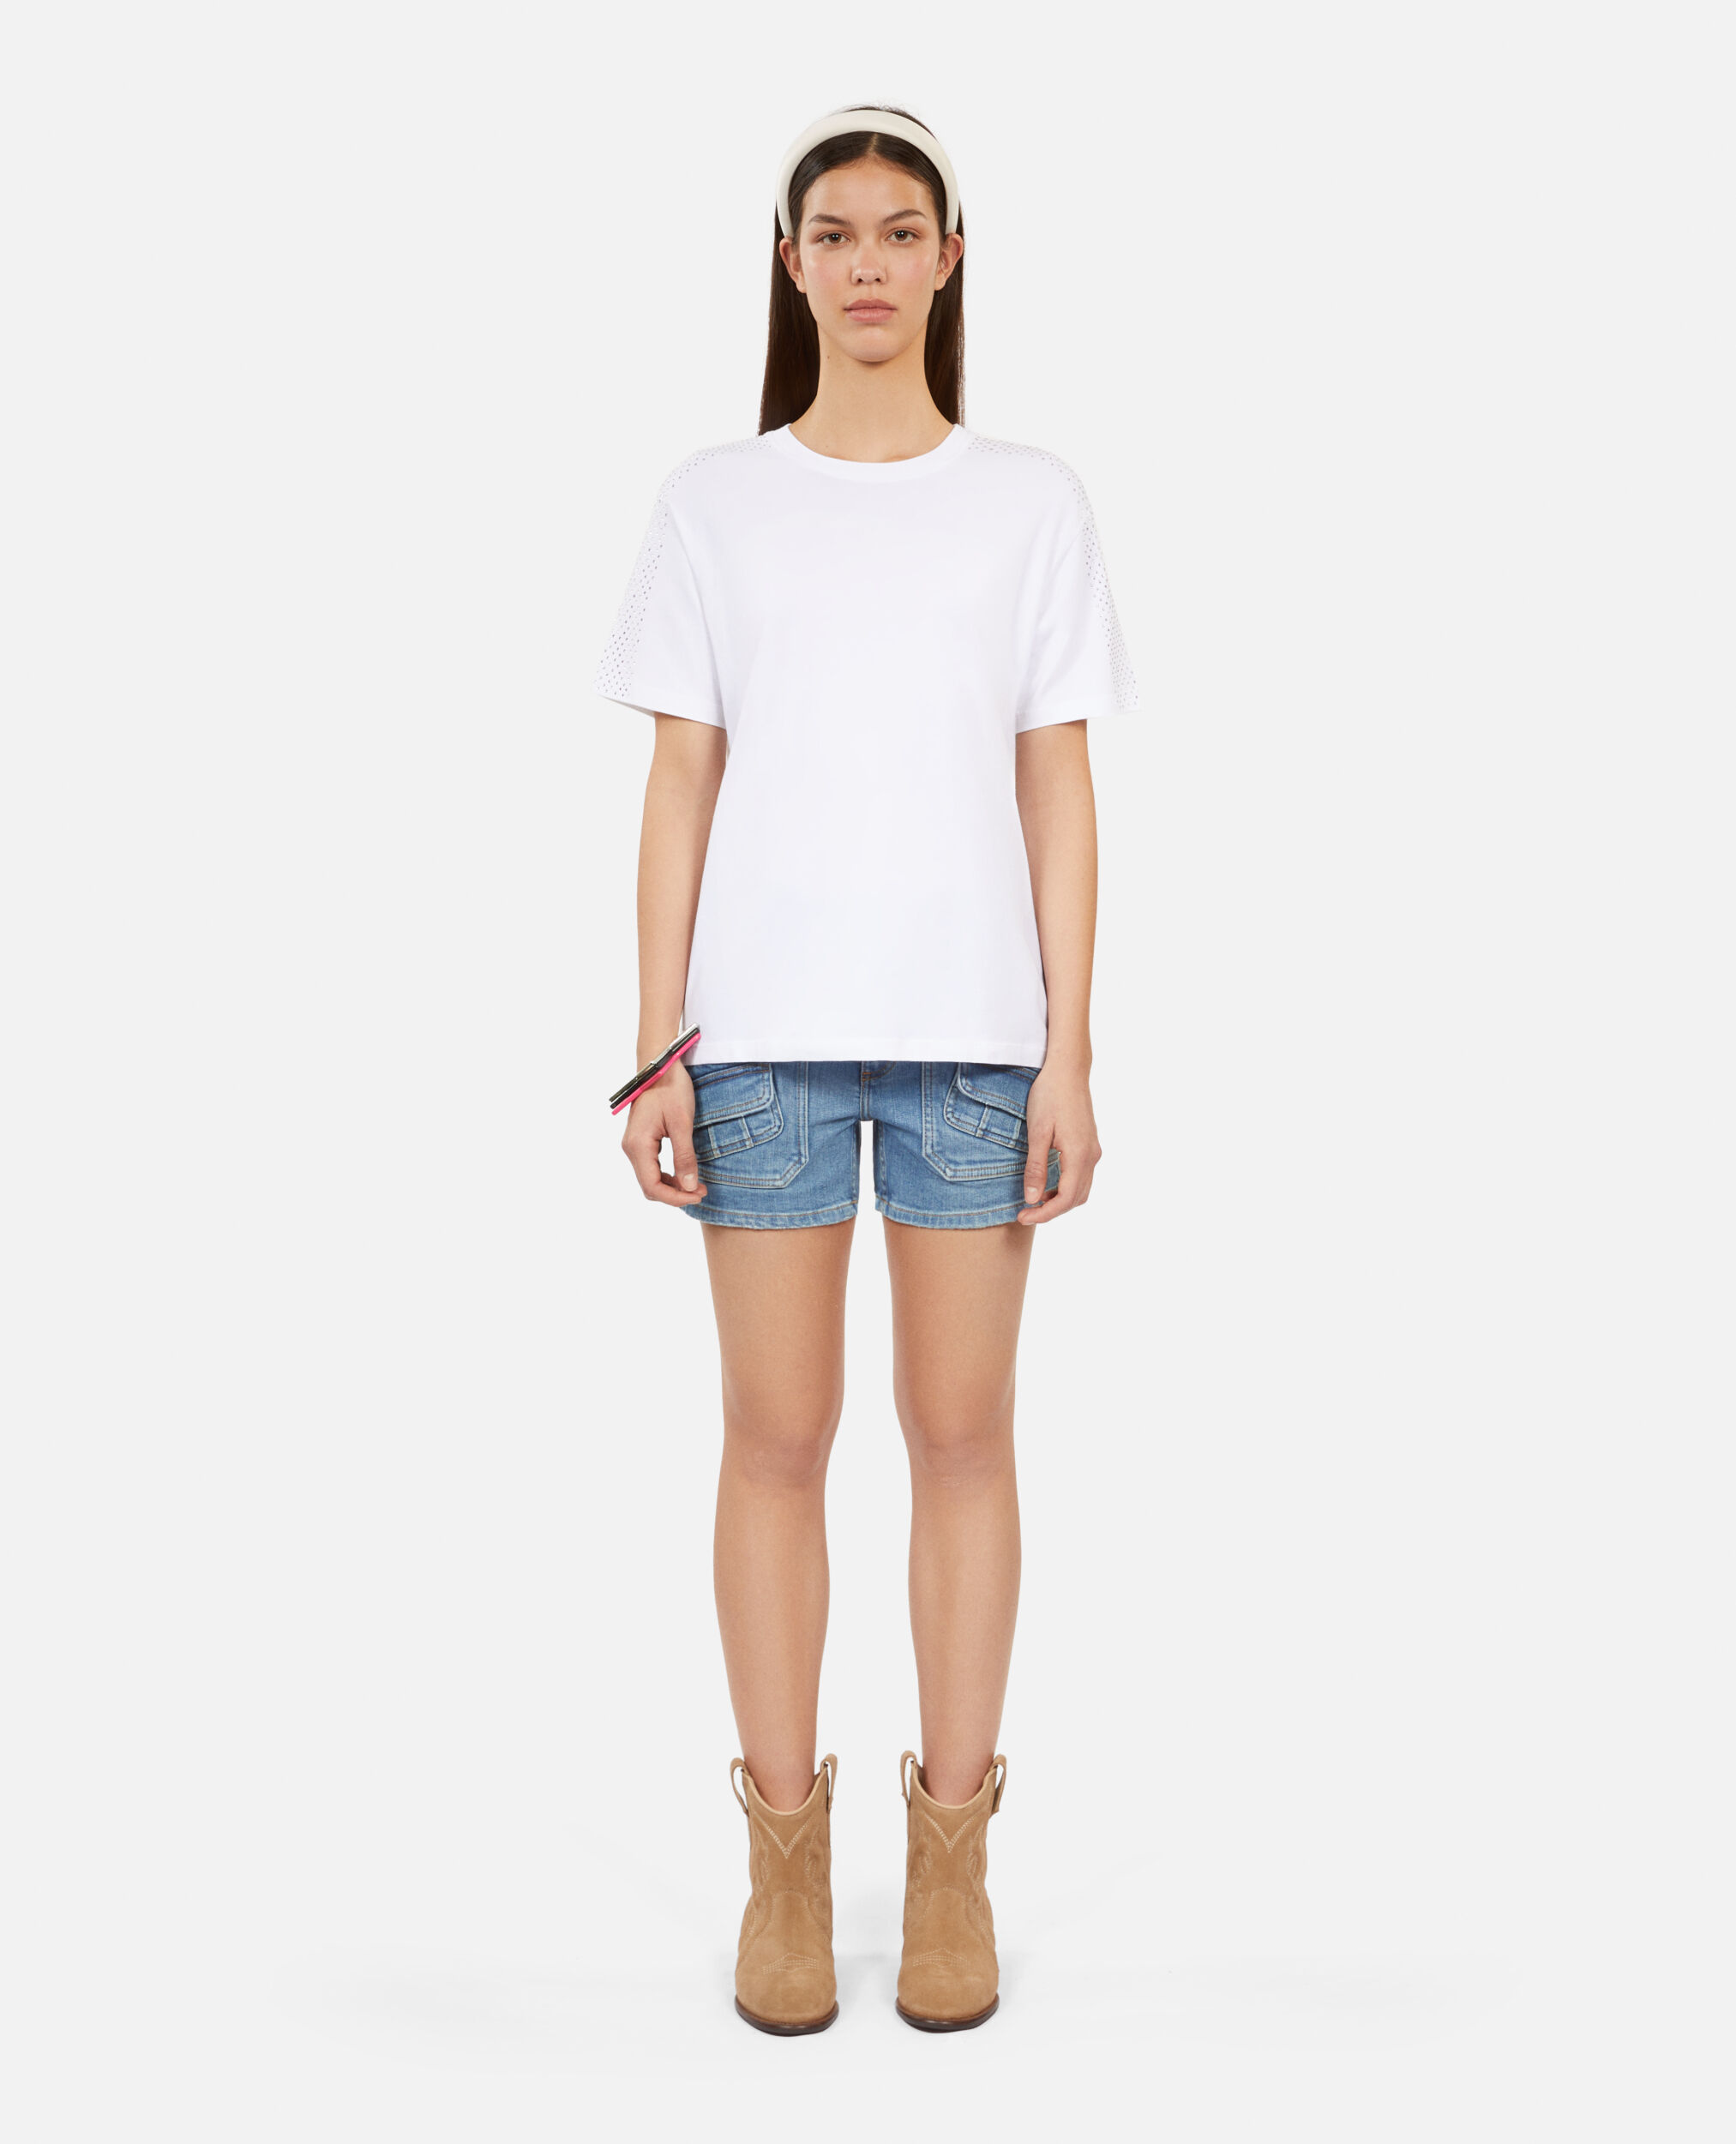 Women's white t-shirt with rhinestones, WHITE, hi-res image number null